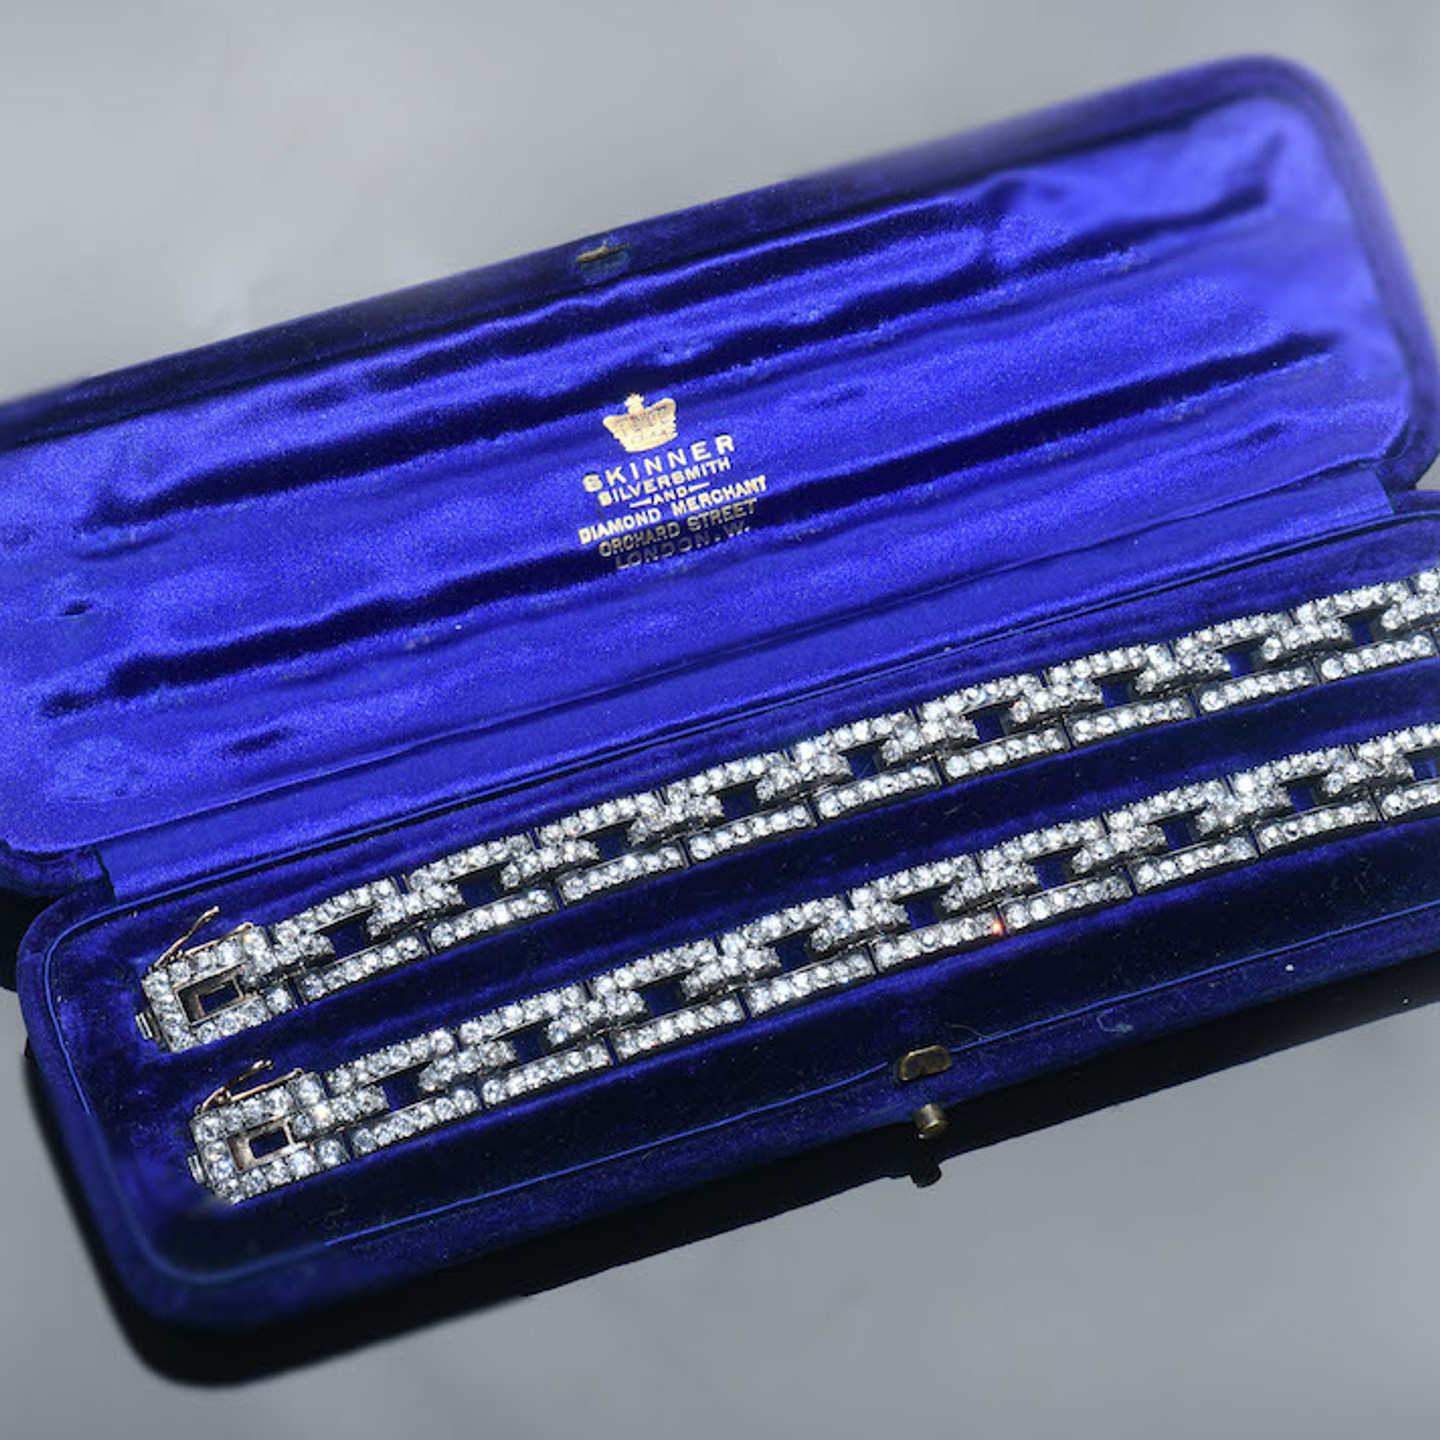 Bentley & Skinner Victorian Bracelets Set With Old Cut Diamonds. Sold For £36,000